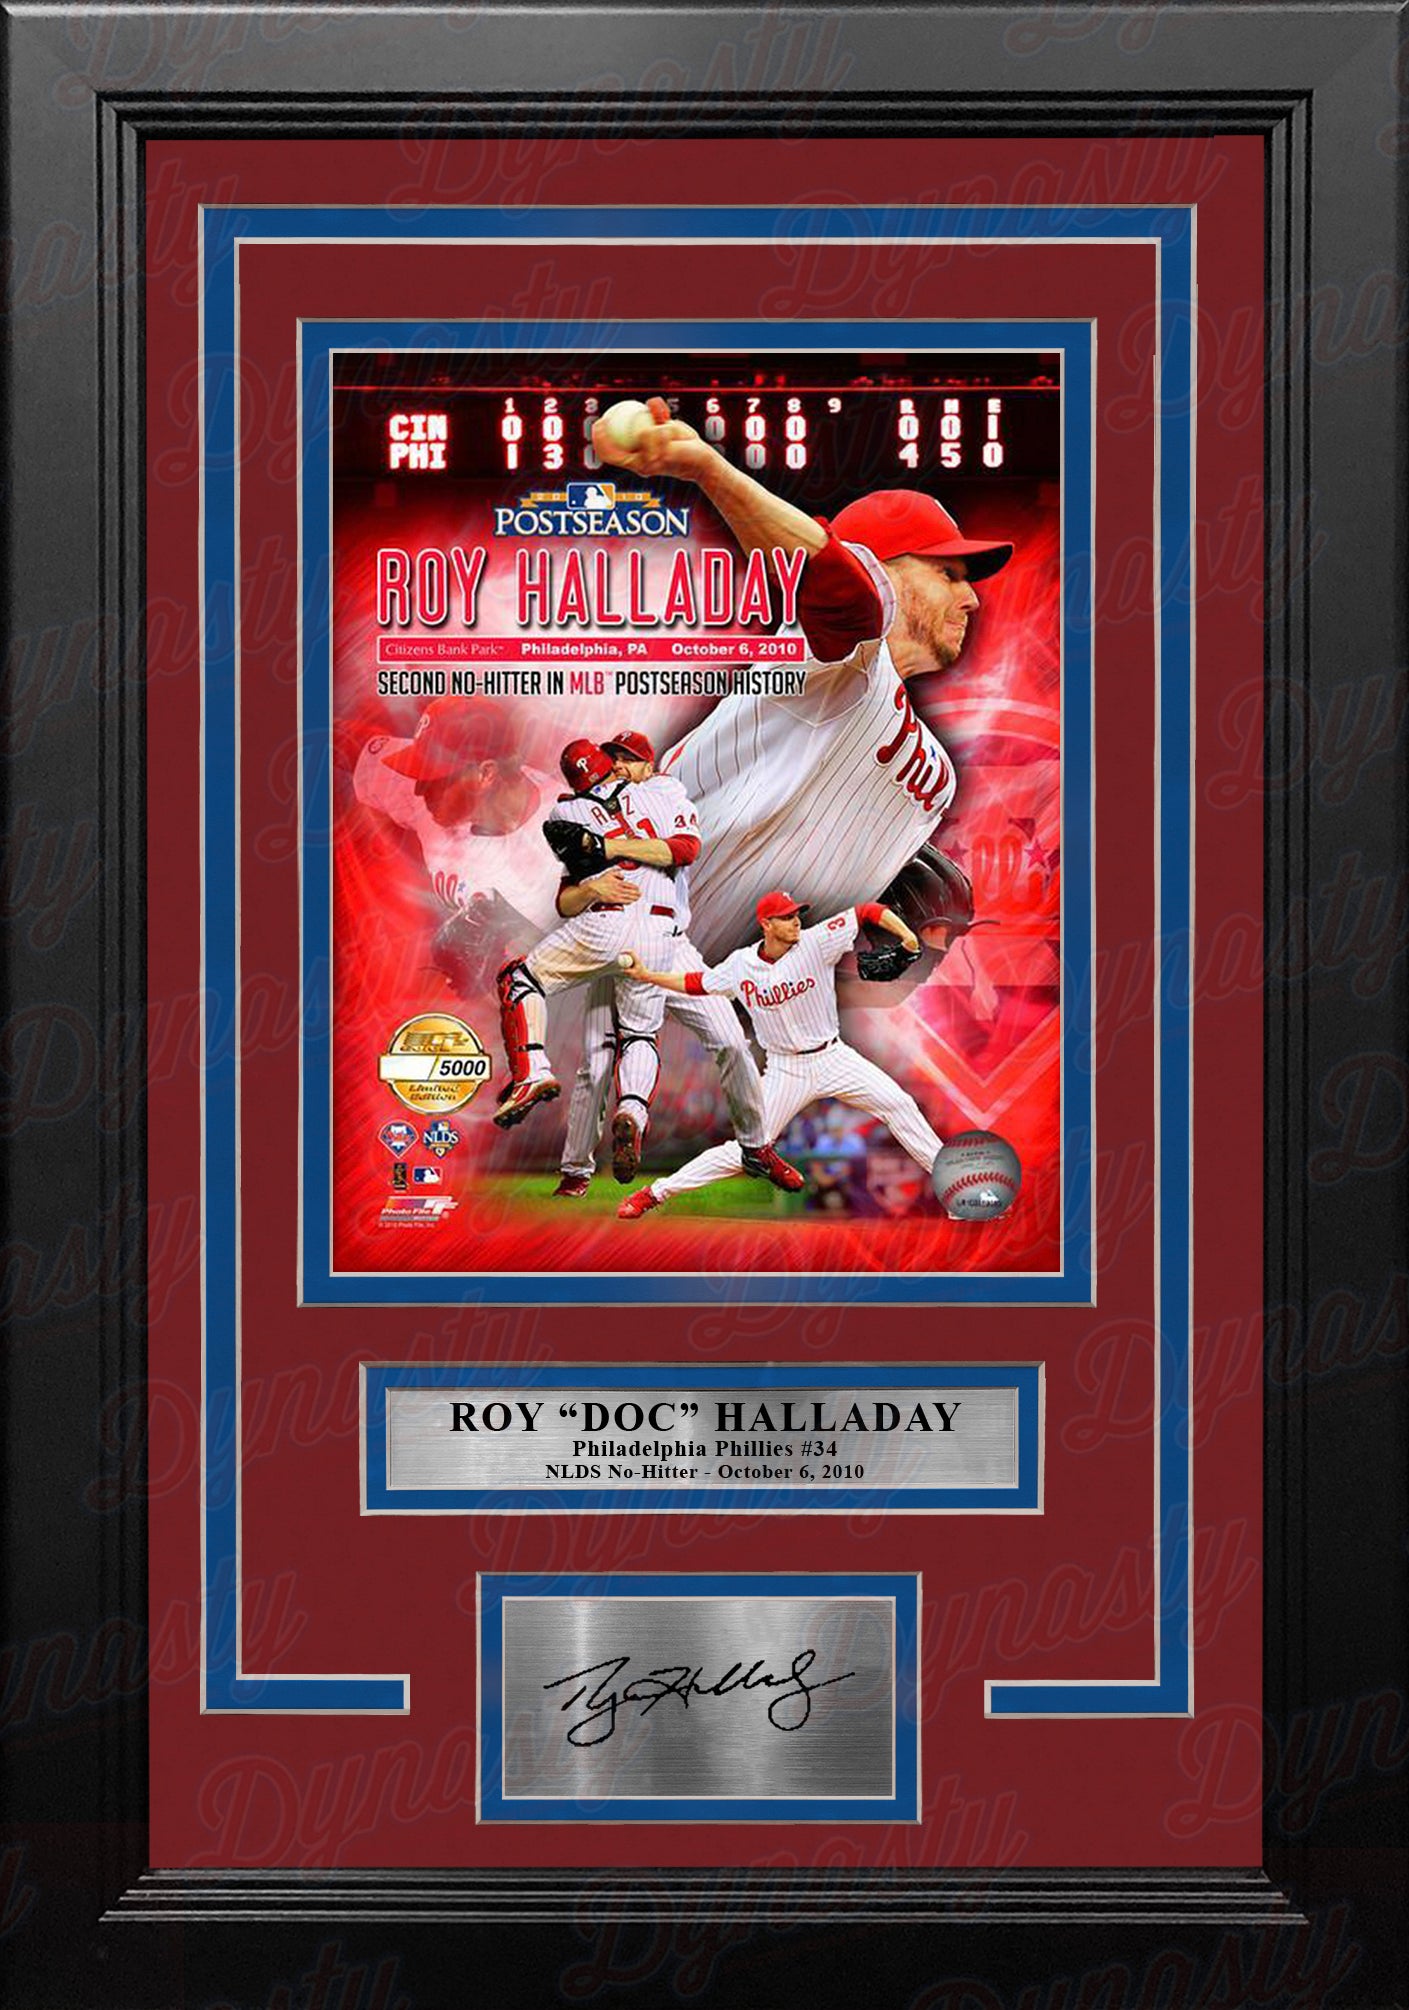 Roy Halladay Philadelphia Phillies No Hitter Collage 8" x 10" Framed Photo with Engraved Autograph - Dynasty Sports & Framing 